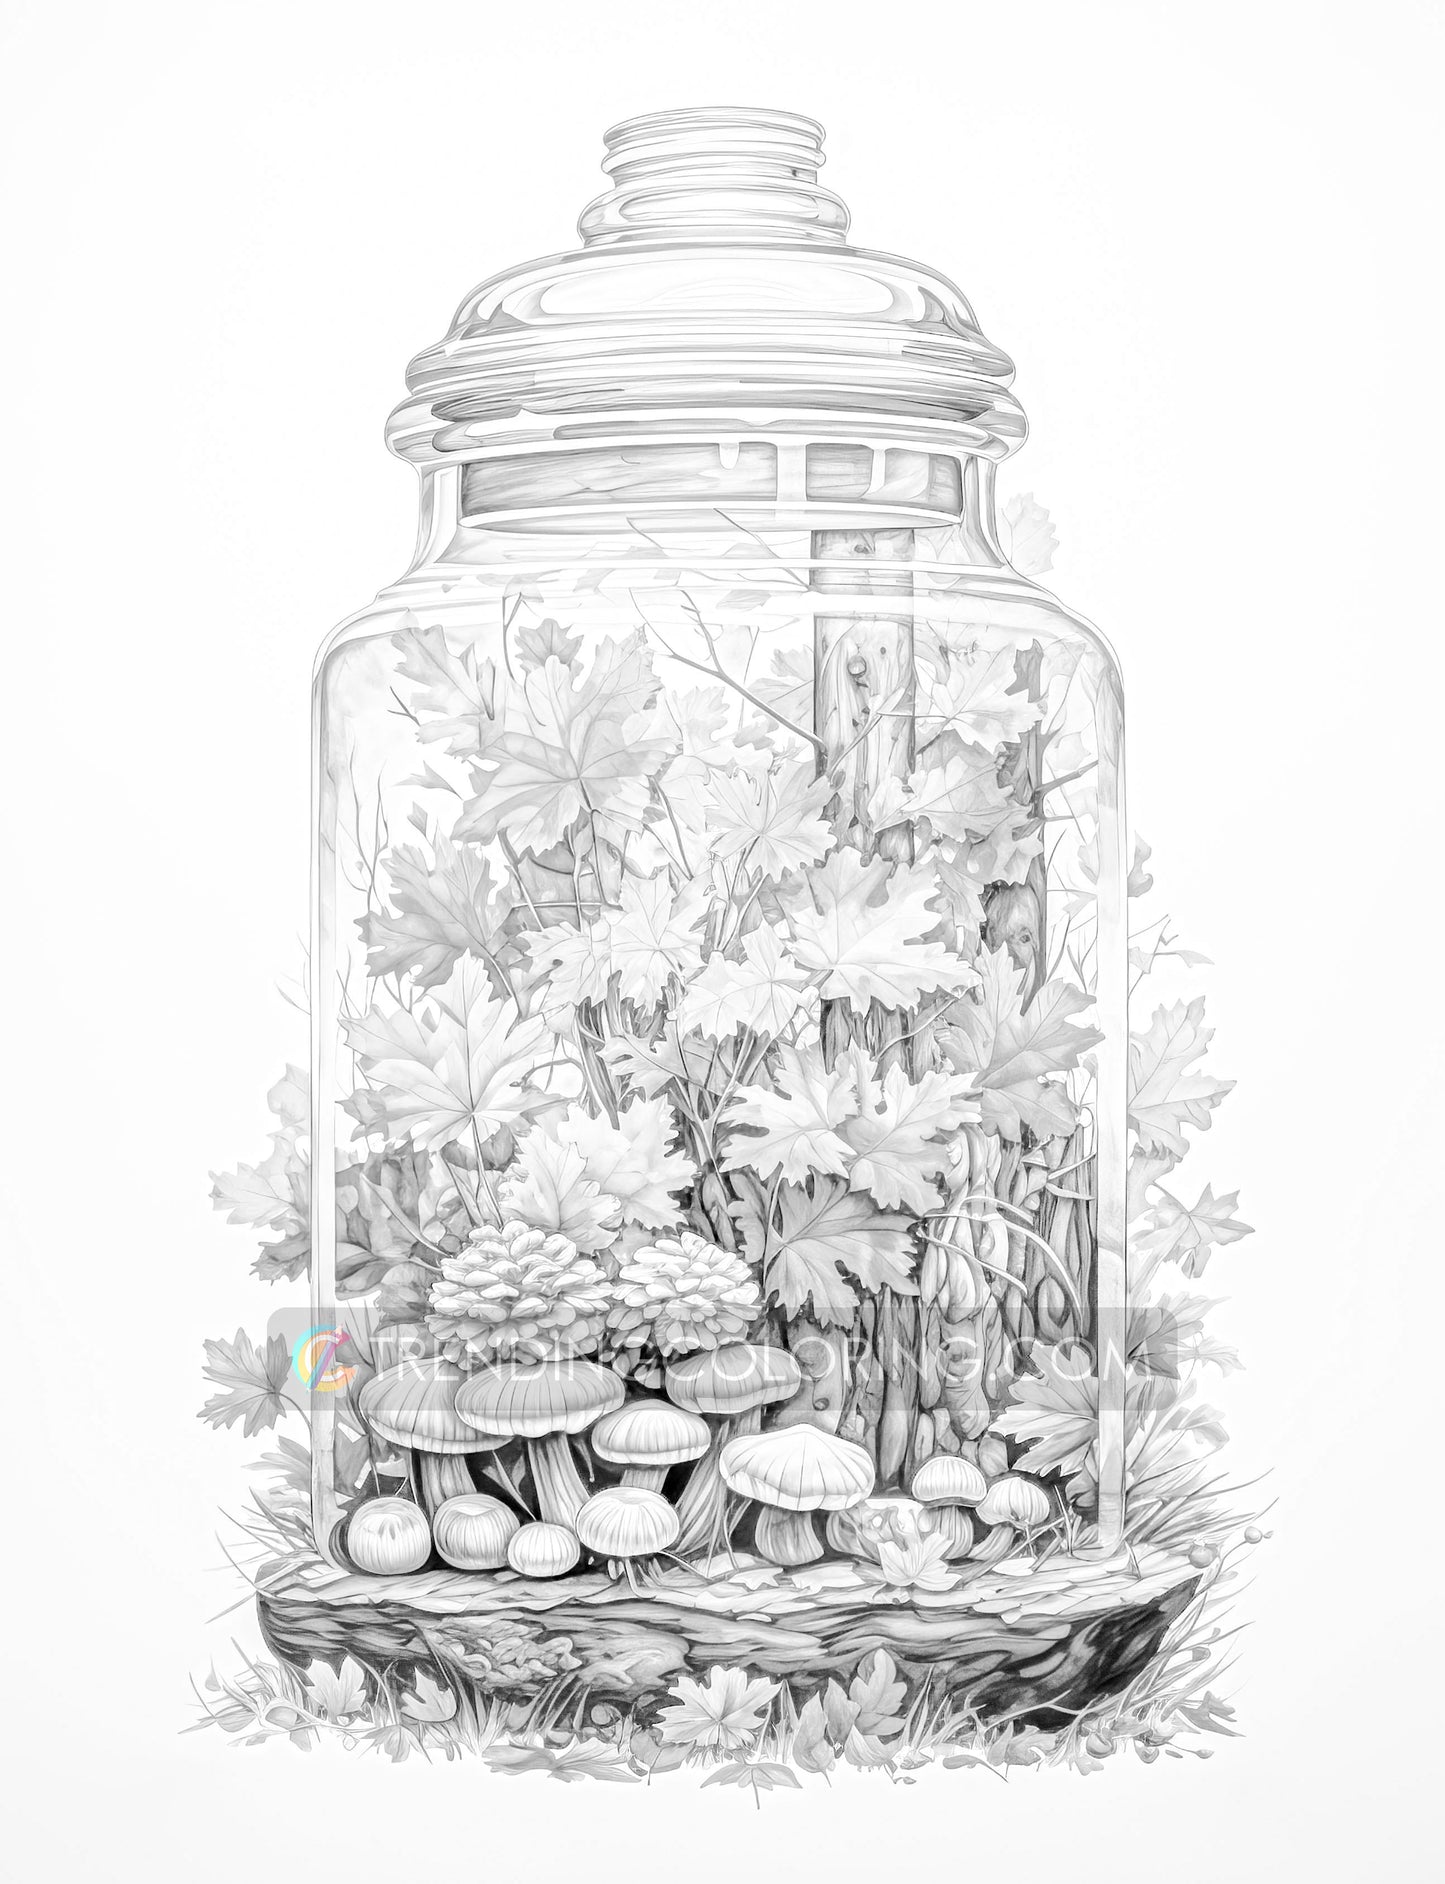 25 Autumn In Jar Grayscale Coloring Pages  - Instant Download - Printable PDF Dark/Light